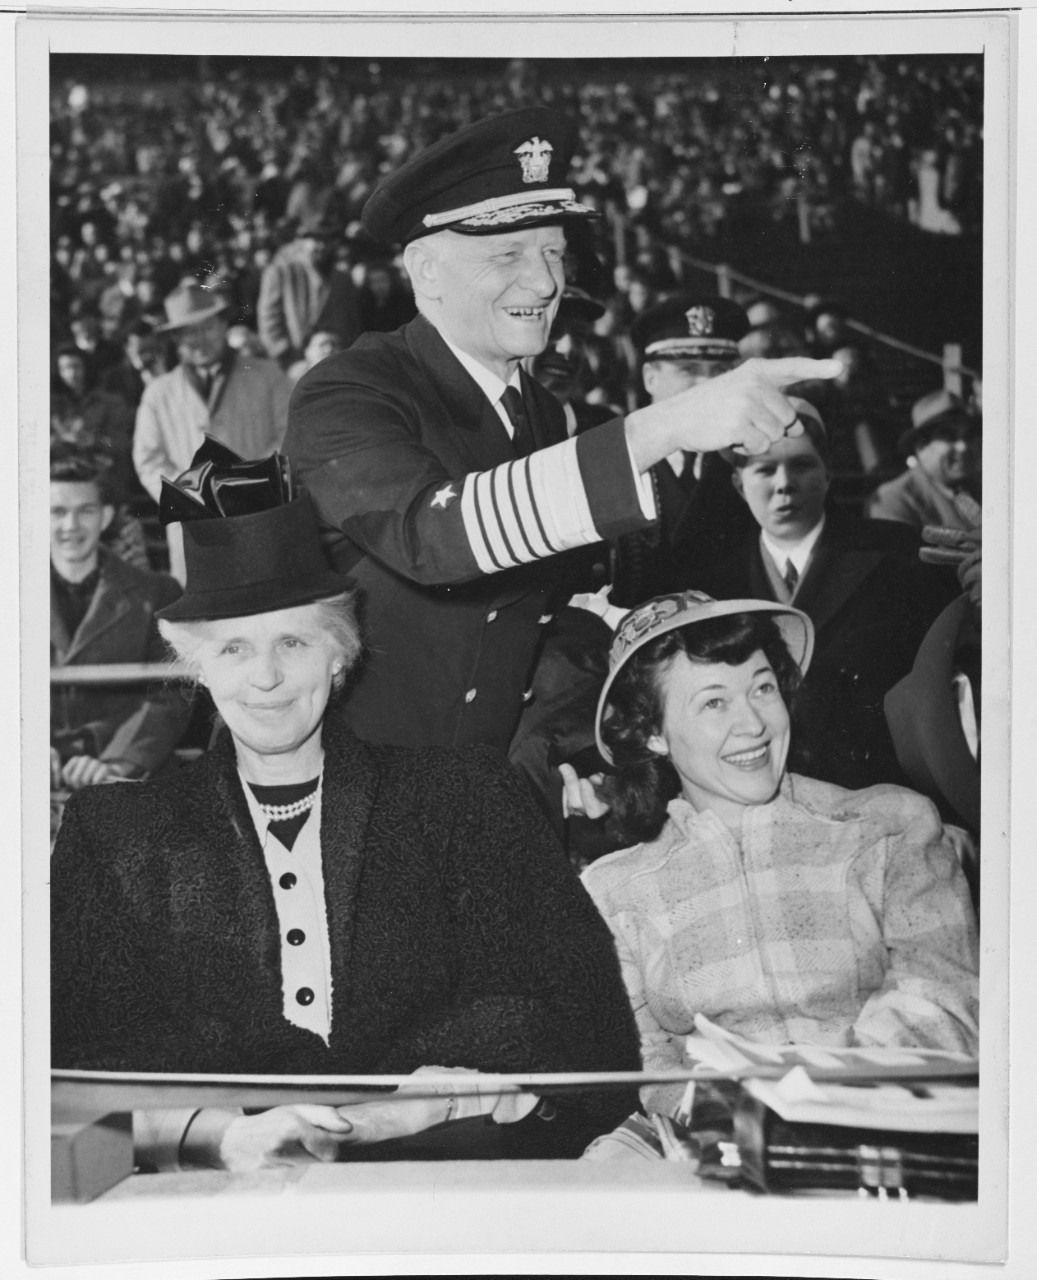 Fleet Admiral Chester W. Nimitz, Chief of Naval Operations, attends a football game.